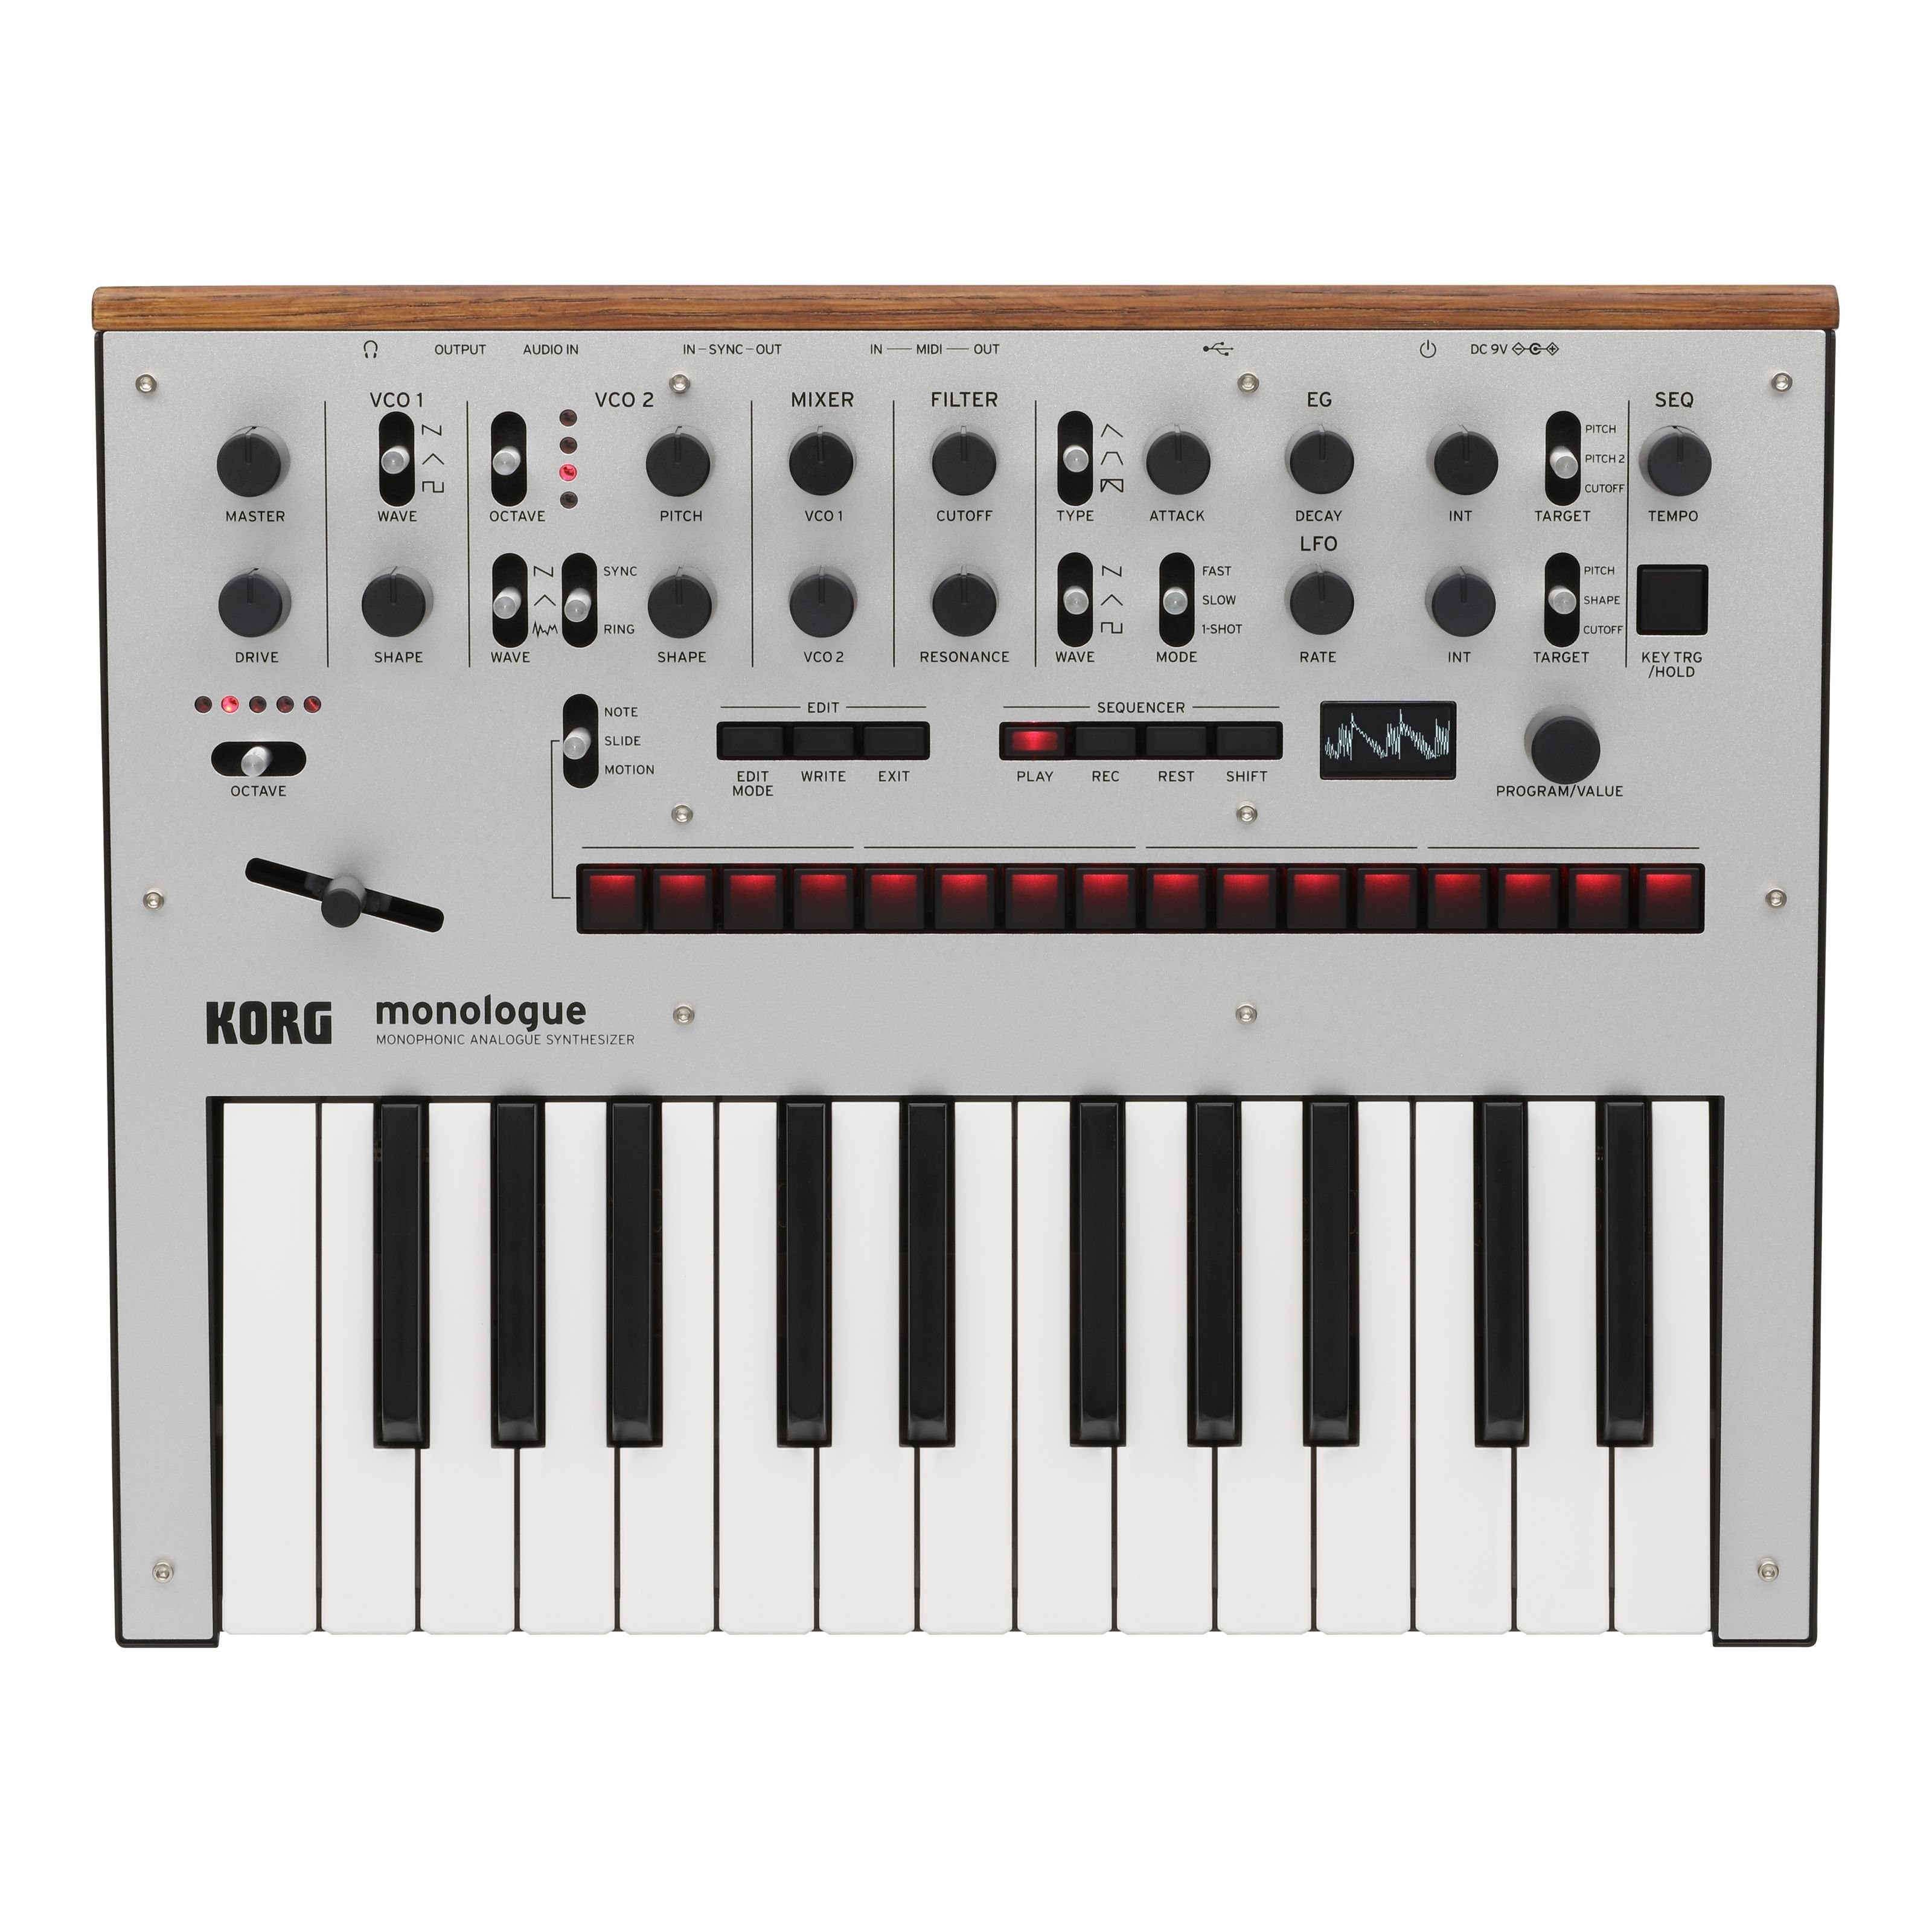 Korg Synthesizer (Synthesizer, Analog Synthesizer), monologue silver - Analog Synthesizer